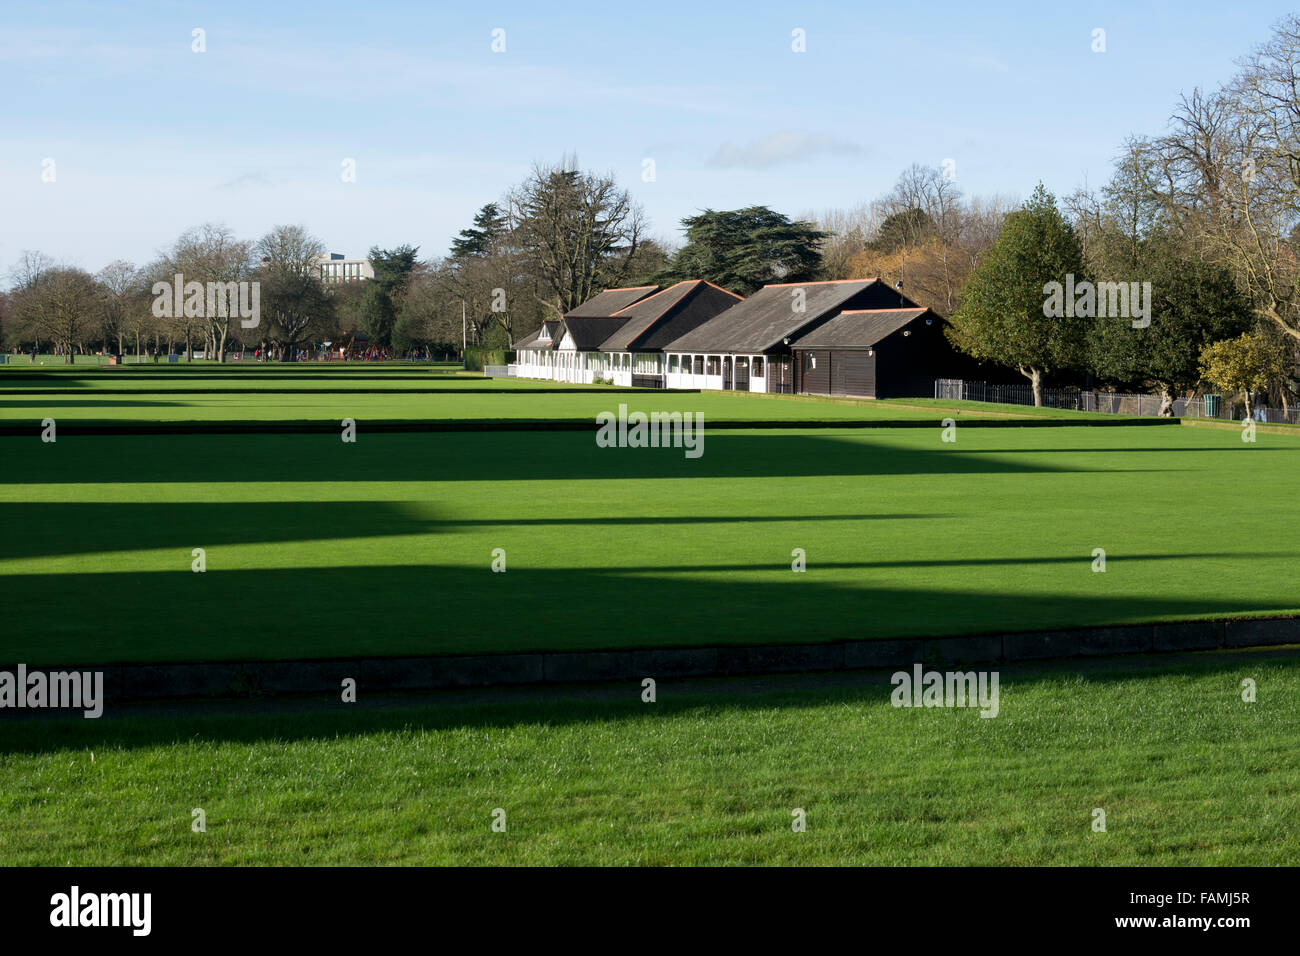 Victoria Park bowling greens in winter, Leamington Spa, UK Stock Photo